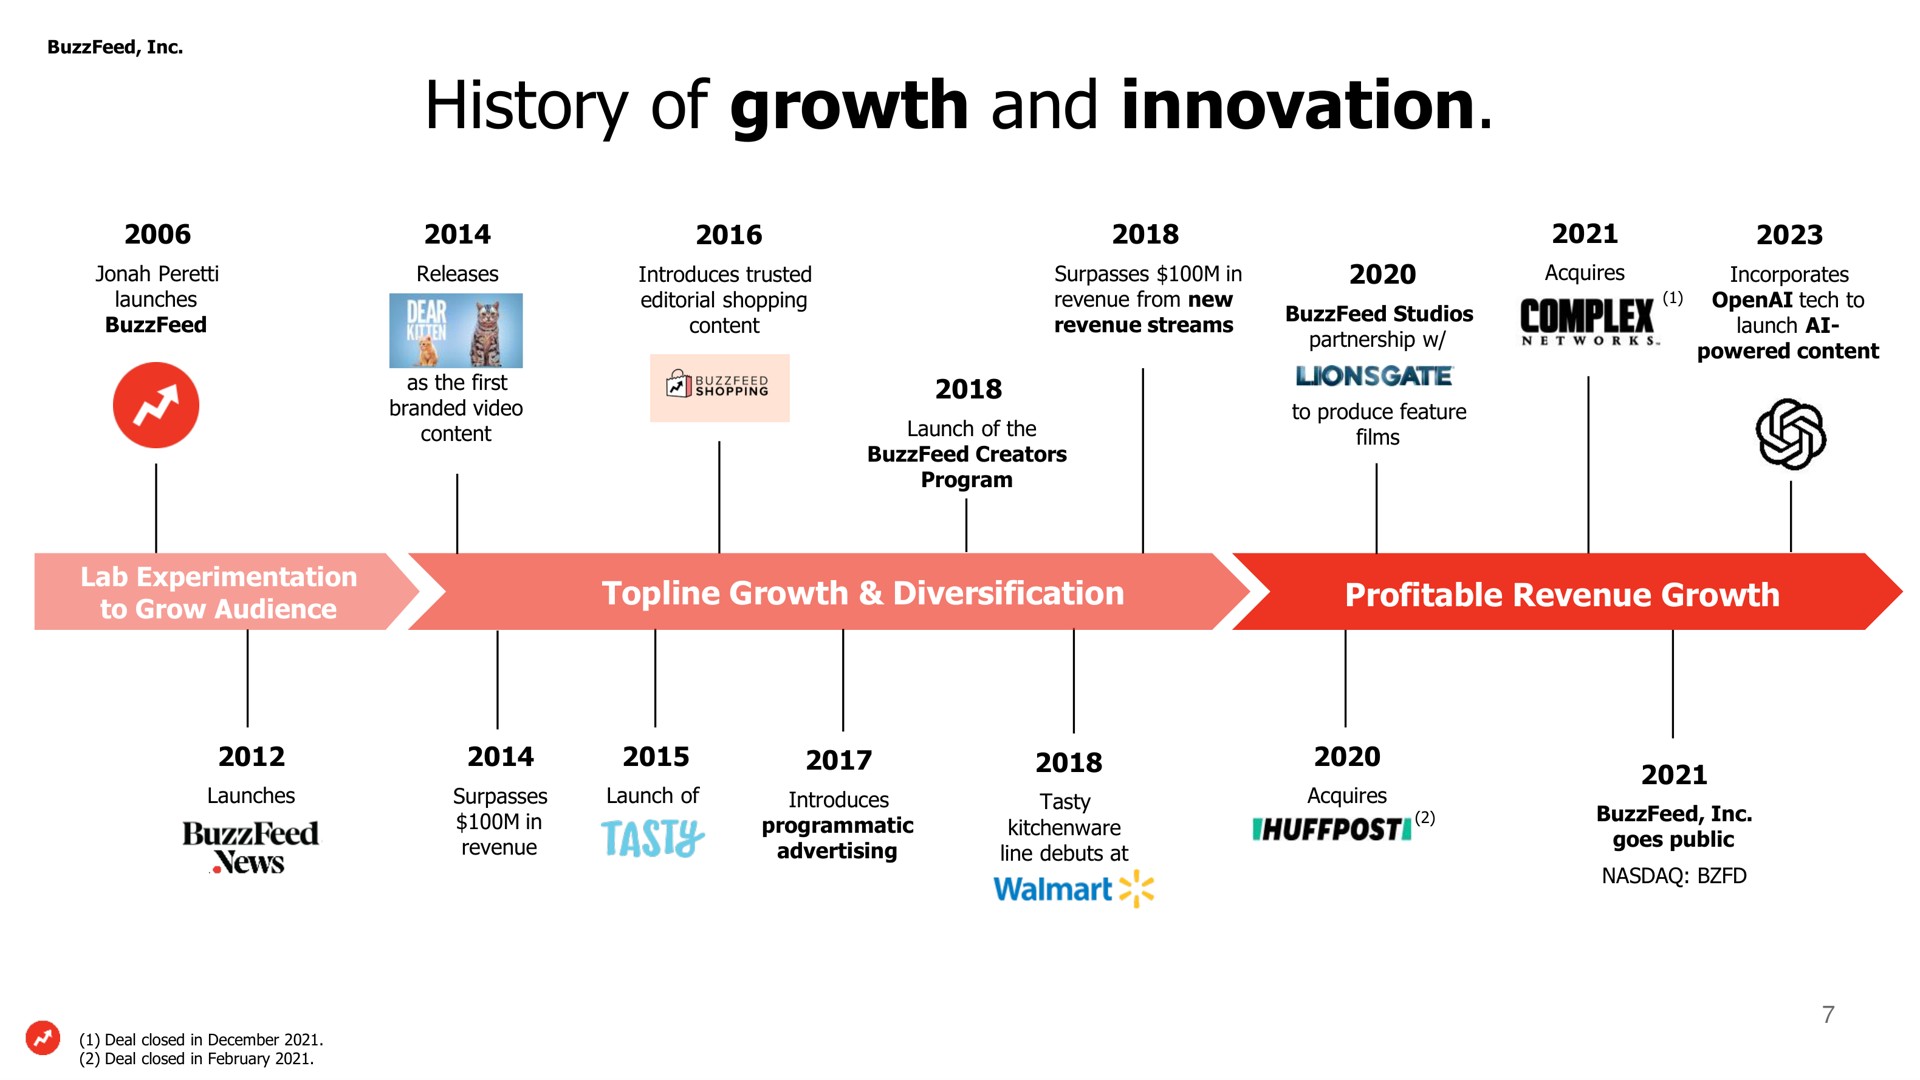 history of growth and innovation | BuzzFeed